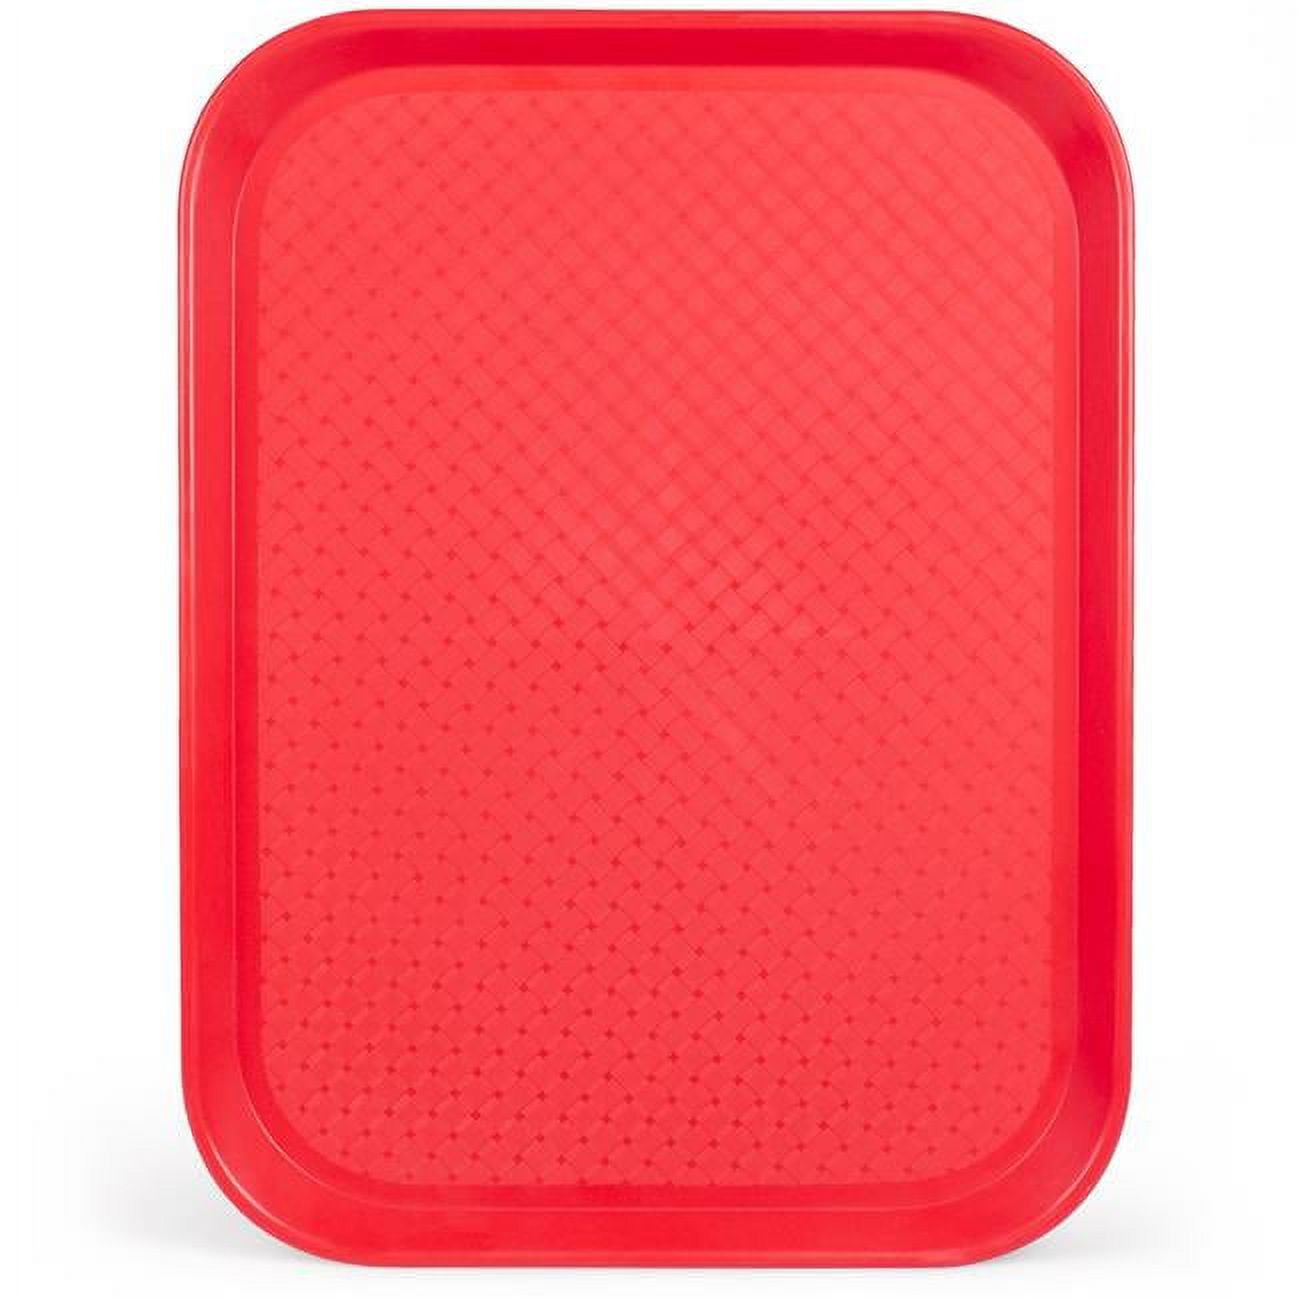 Kcaf-203 12 X 16 In. Cafeteria Tray, Red